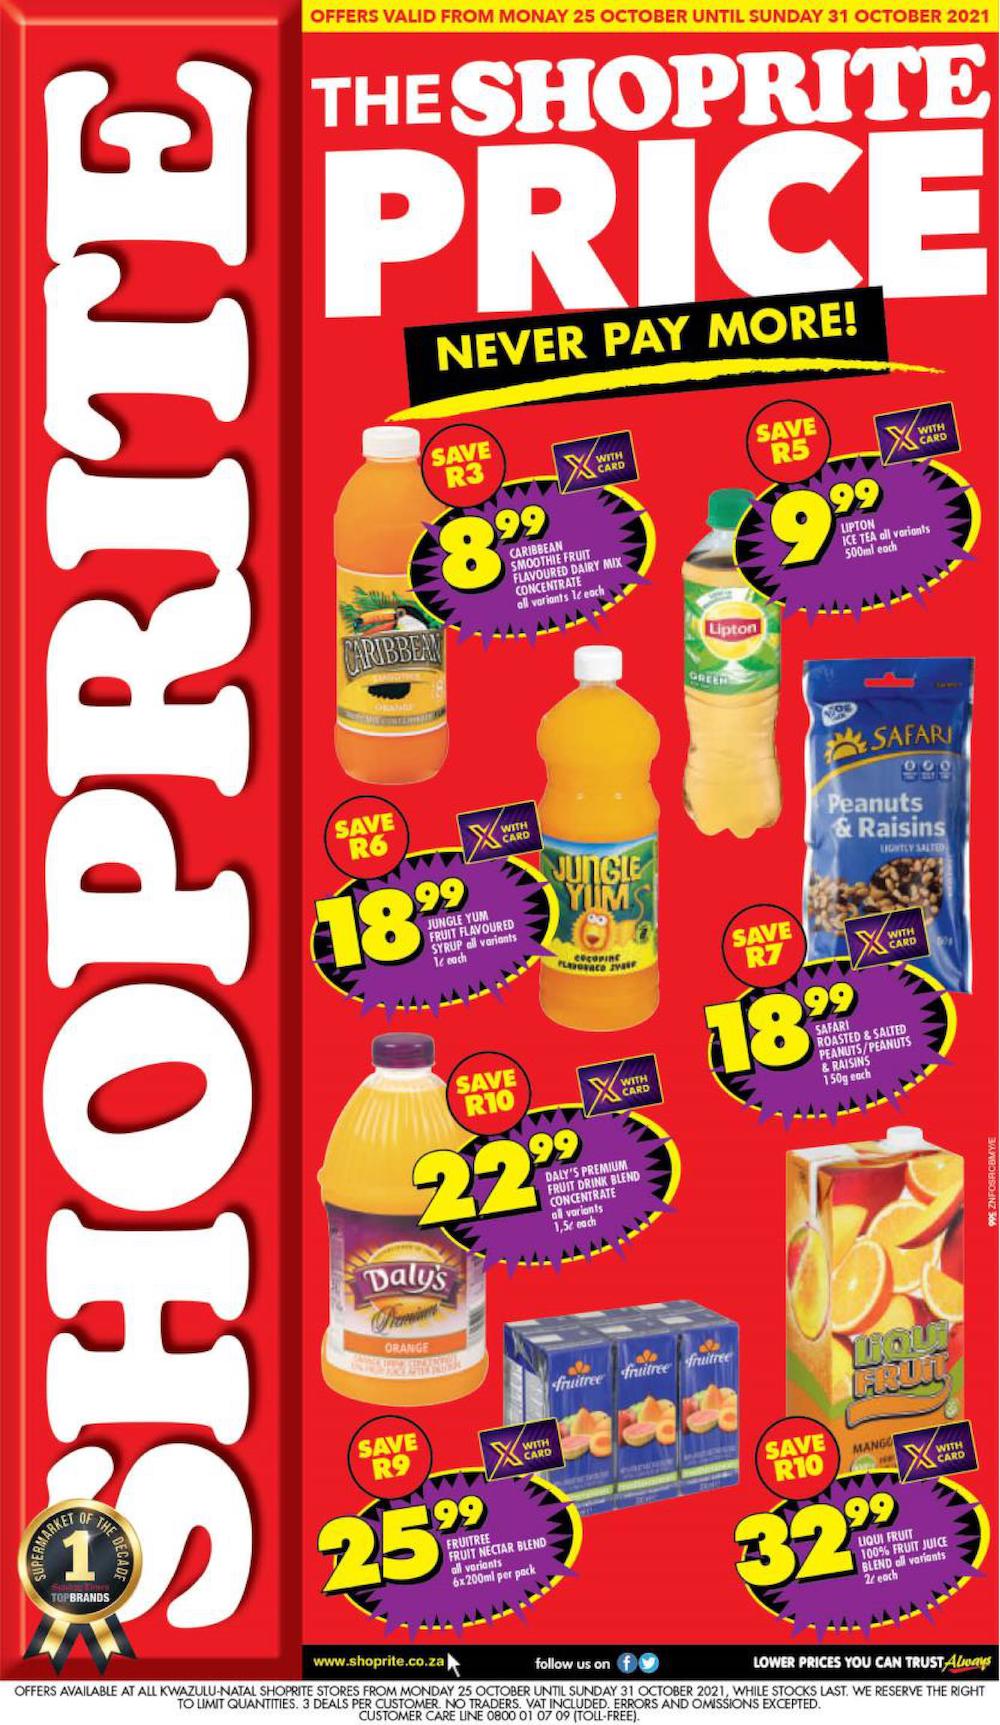 Shoprite Specials Never Pay More 25 – 31 October 2021